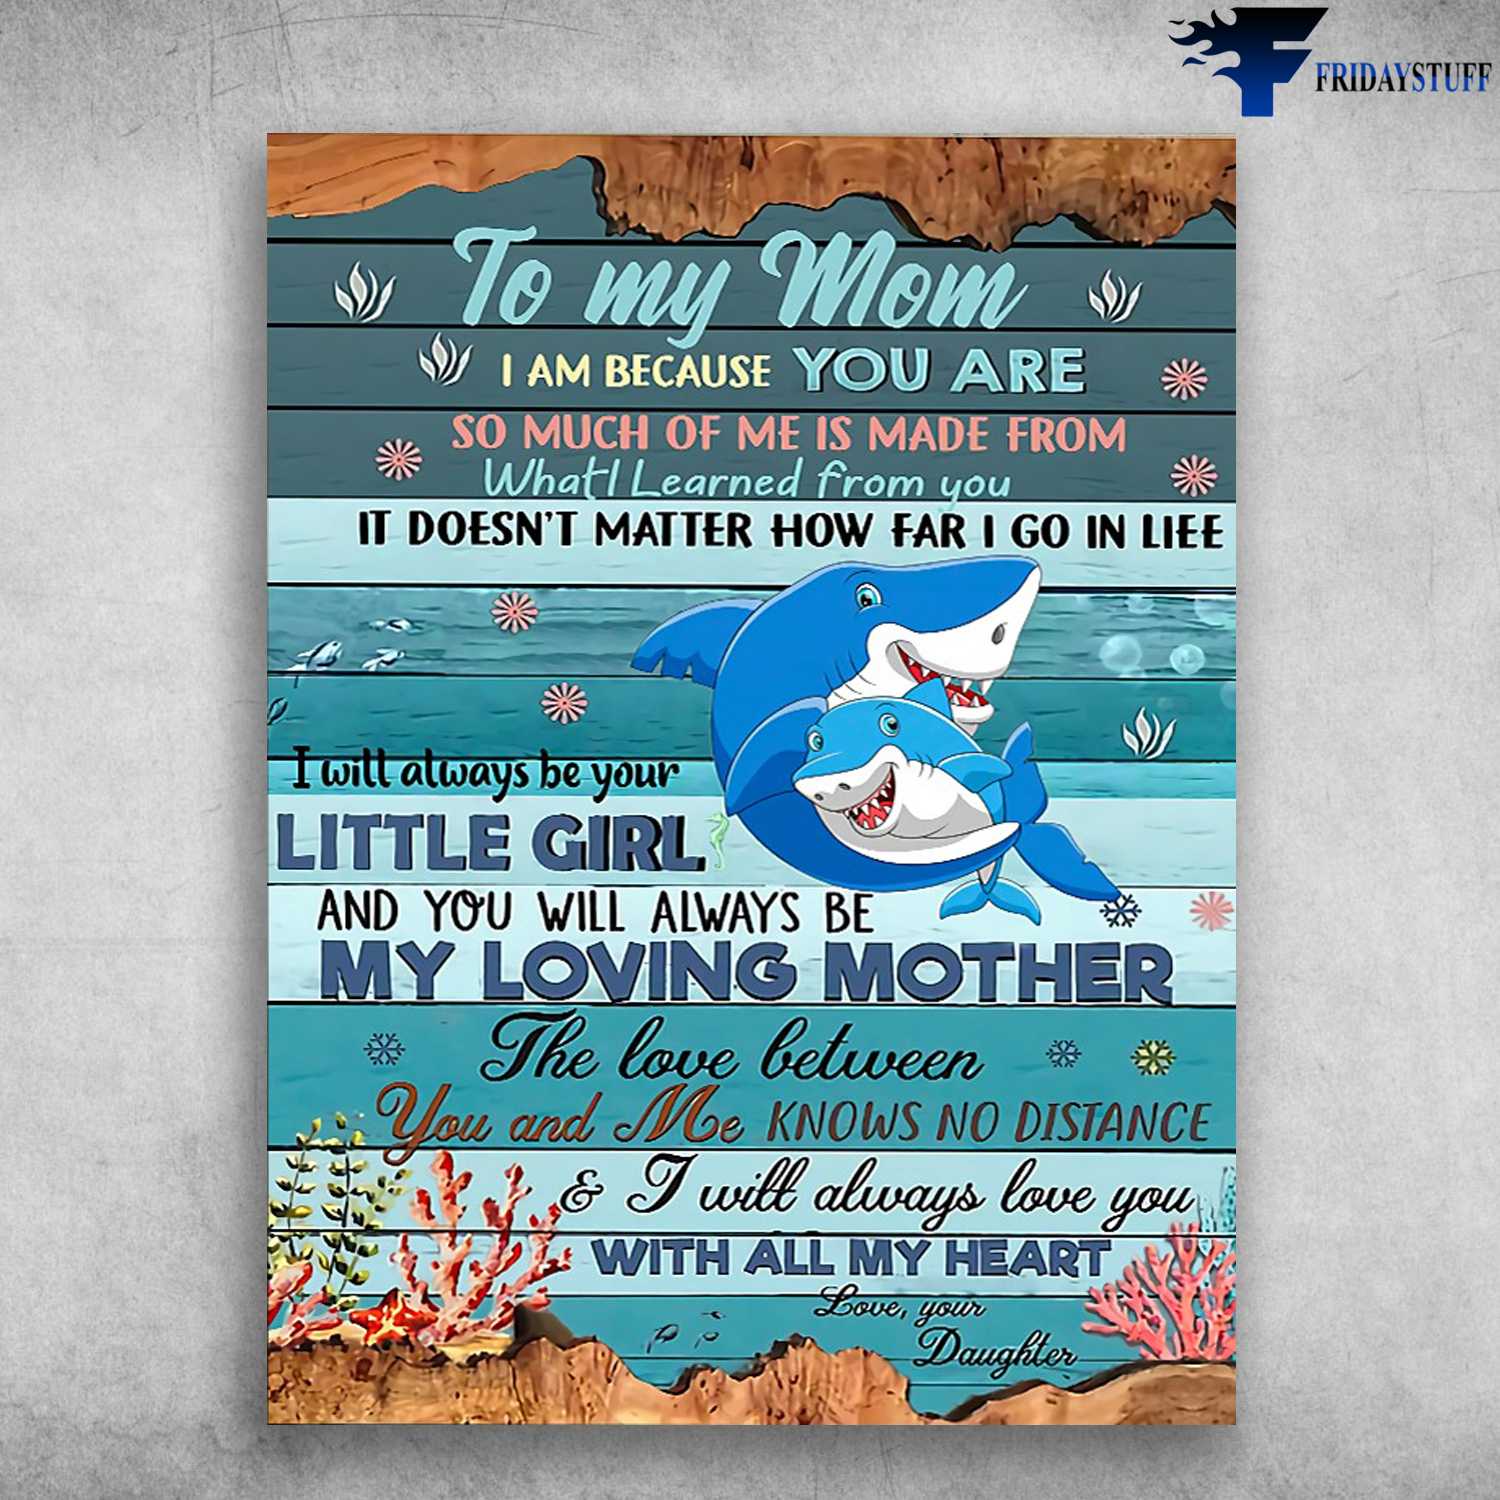 Mon And Daughter, Shark Poster - To My Mom, I Am Because You Are, So Much Of Me Is Made From, What I Learned From You, It Doesn't Matter How Far I Go In Life